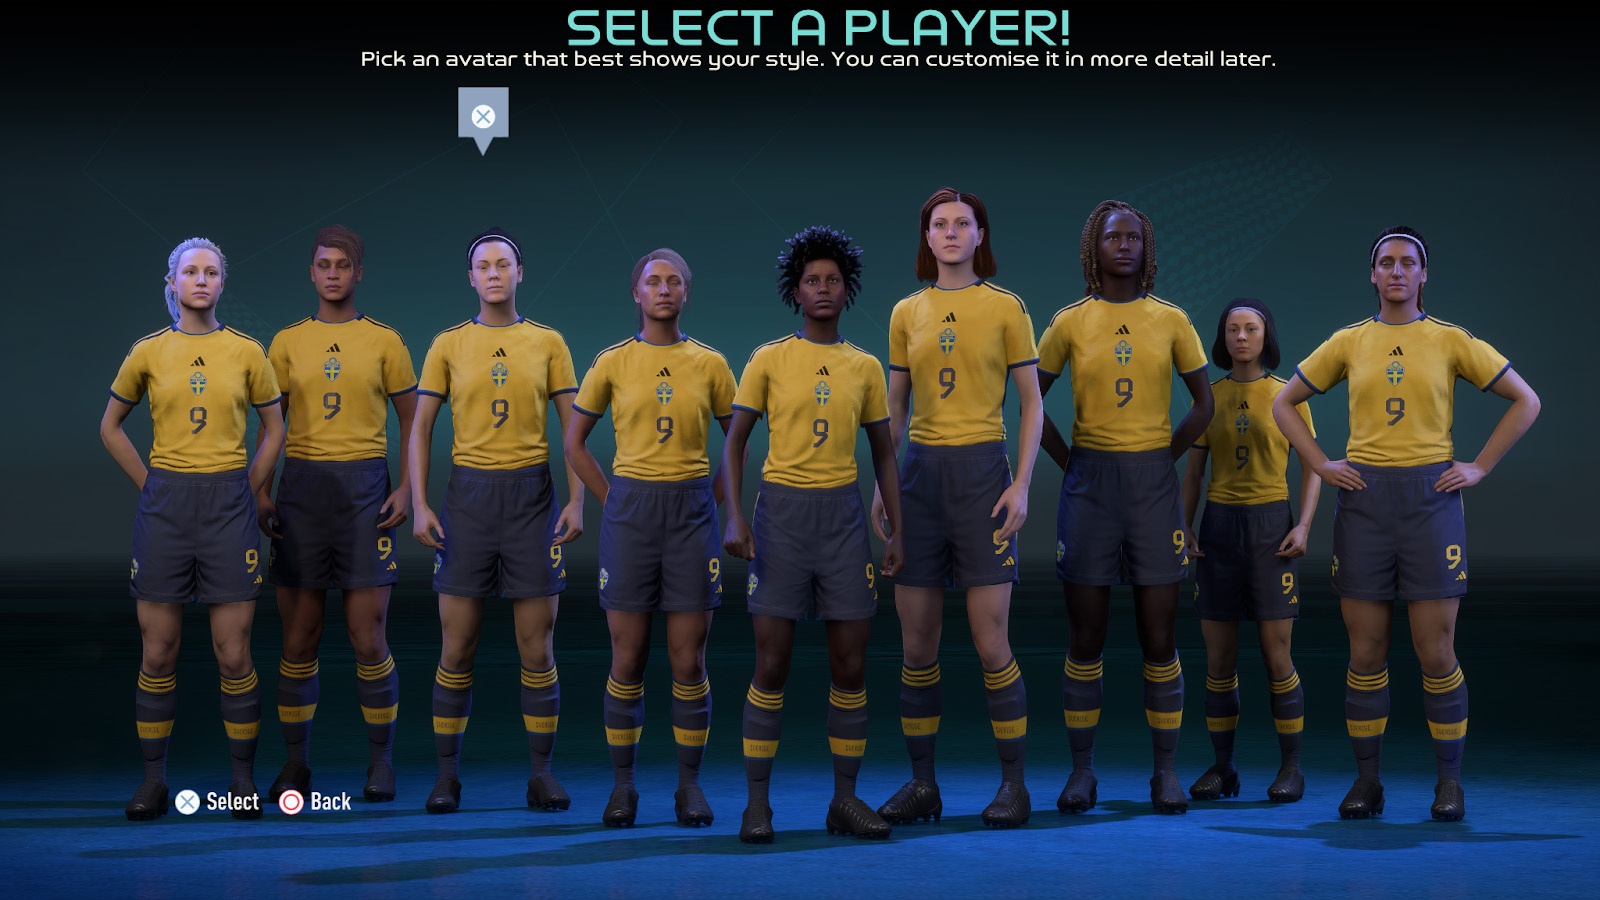 (In a new mode you can choose a female player, or create one yourself.)